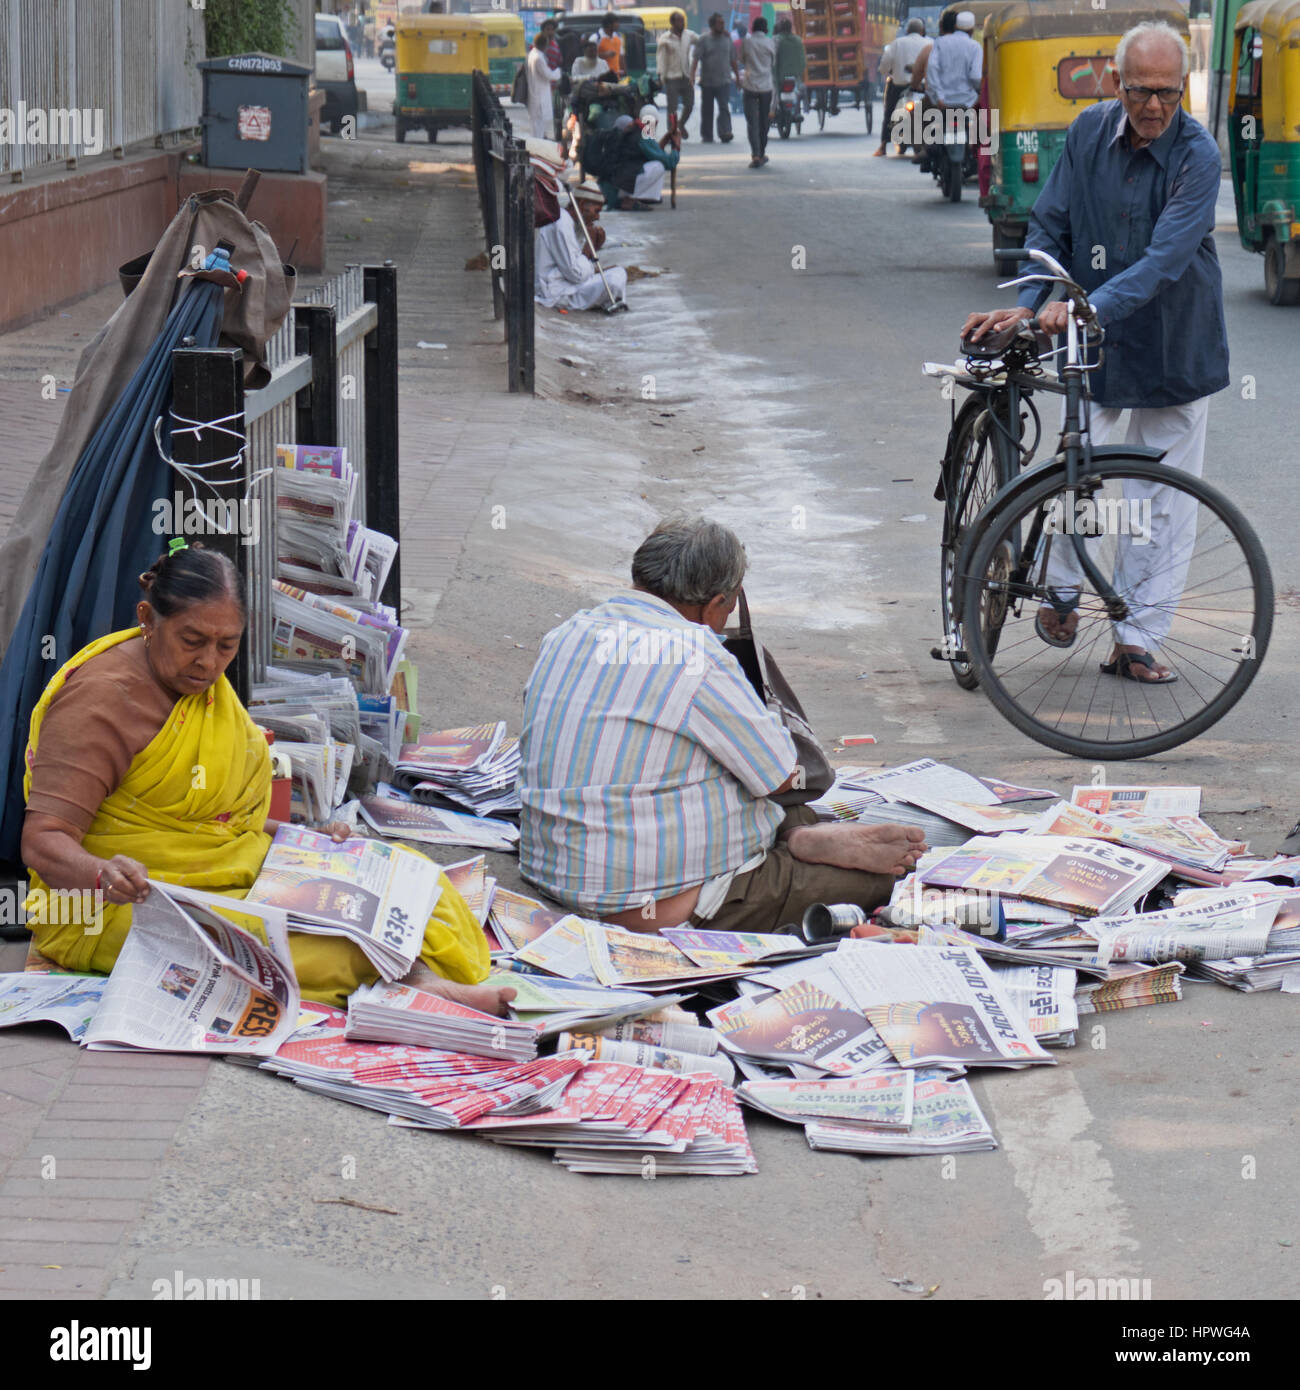 An unidentified newspaper seller with a pitch on a busy street in Ahmedabad, India, amidst the early morning traffic Stock Photo